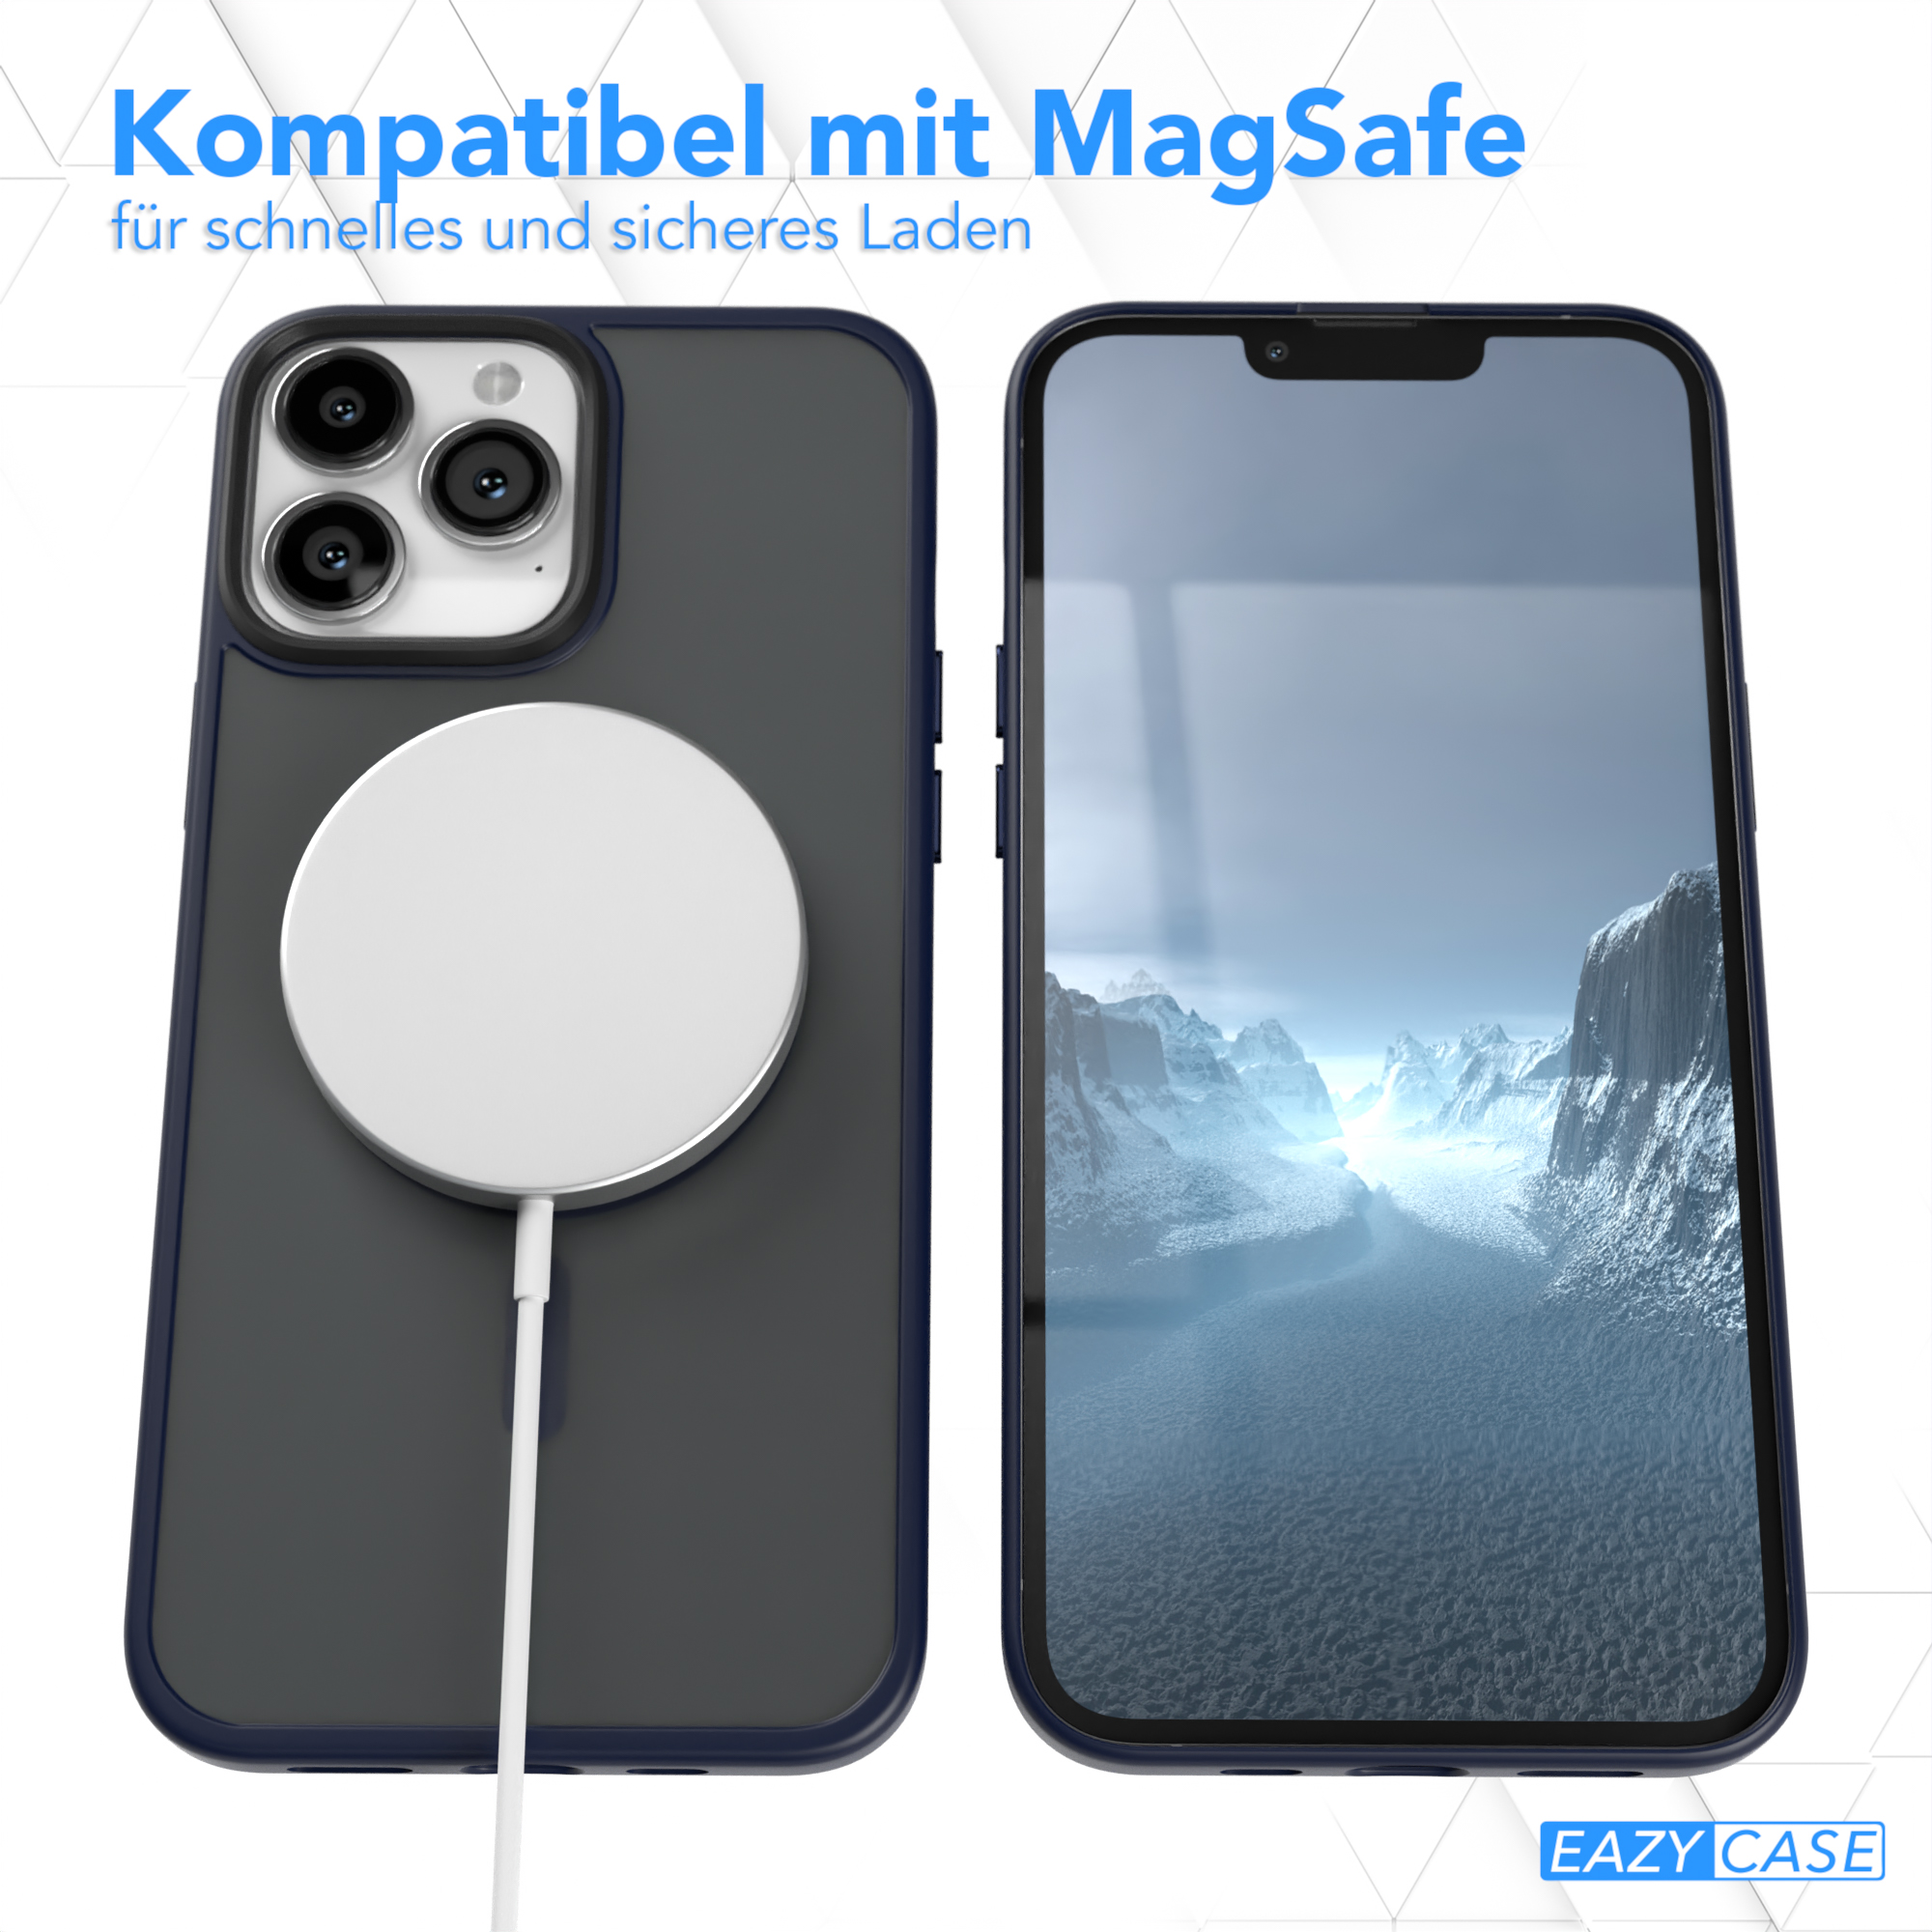 EAZY CASE Outdoor Backcover, MagSafe, Case mit 13 Pro iPhone Max, Blau Apple